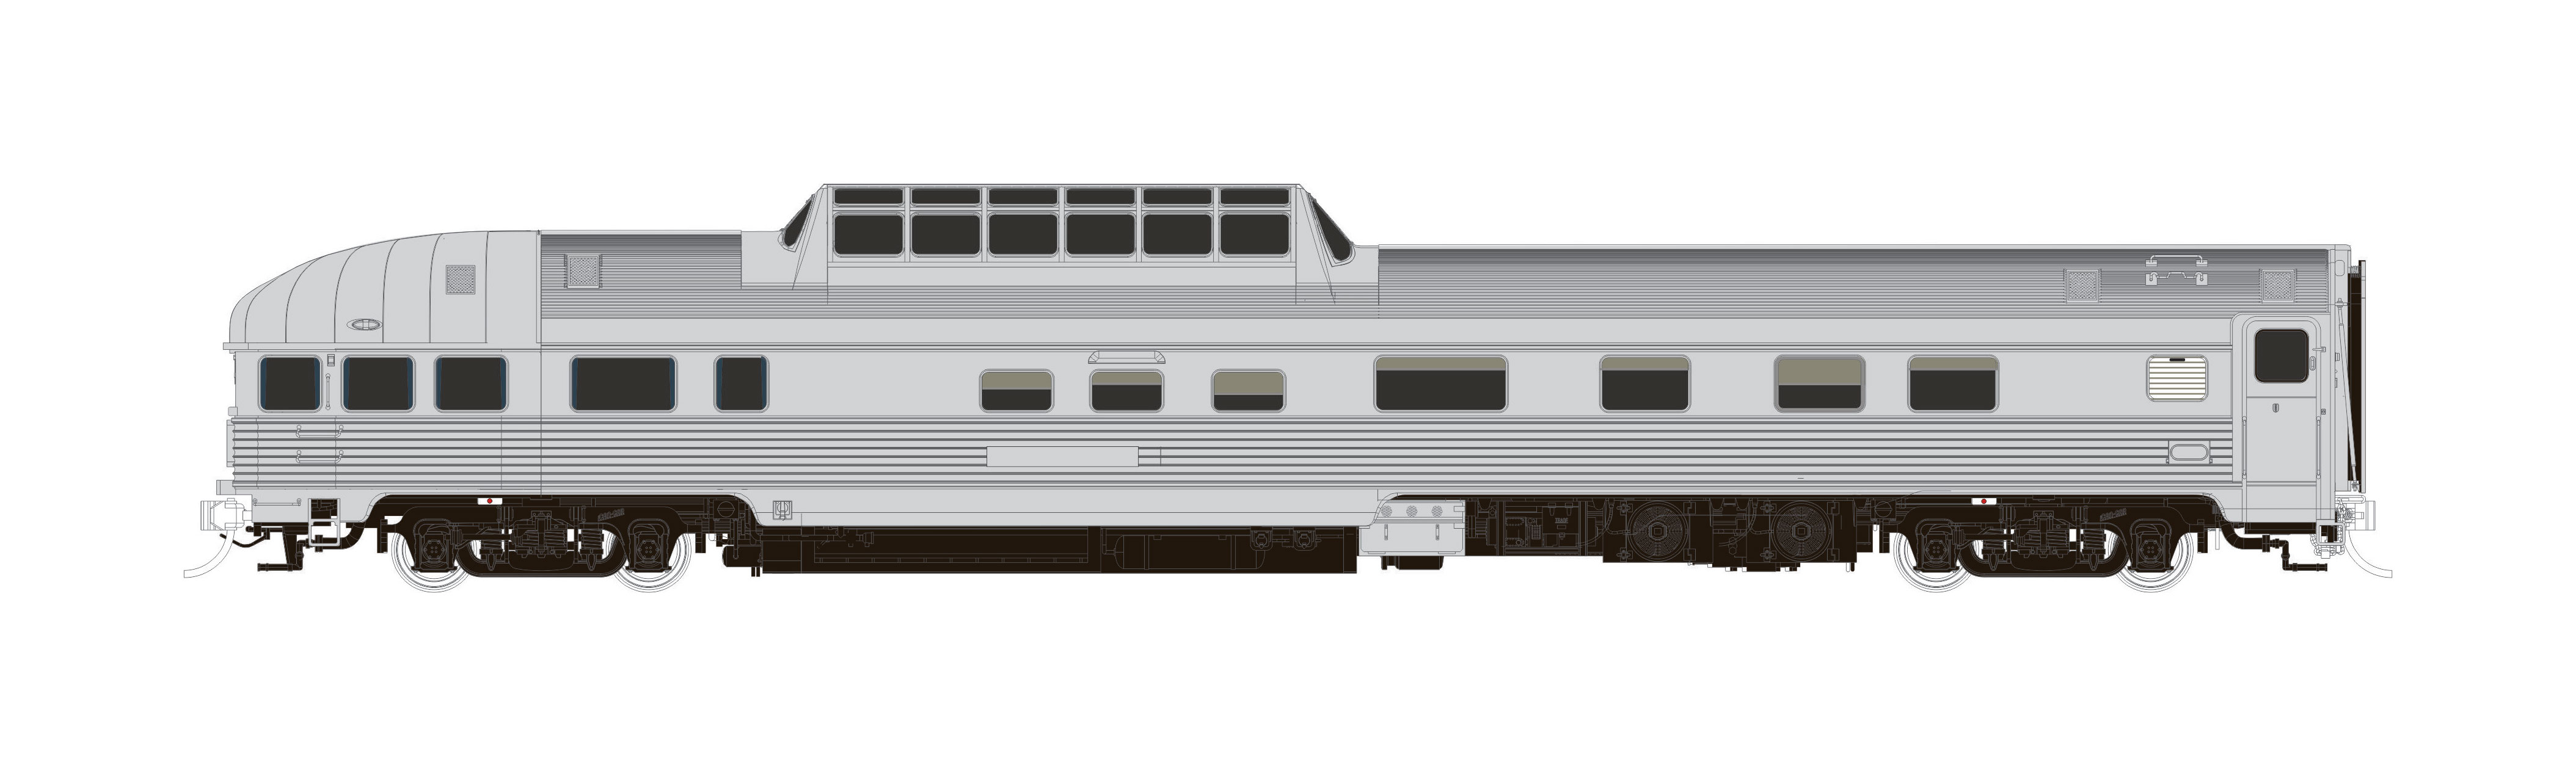 N Scale - Rapido Trains - 550007 - Passenger - Undecorated - 10-pack